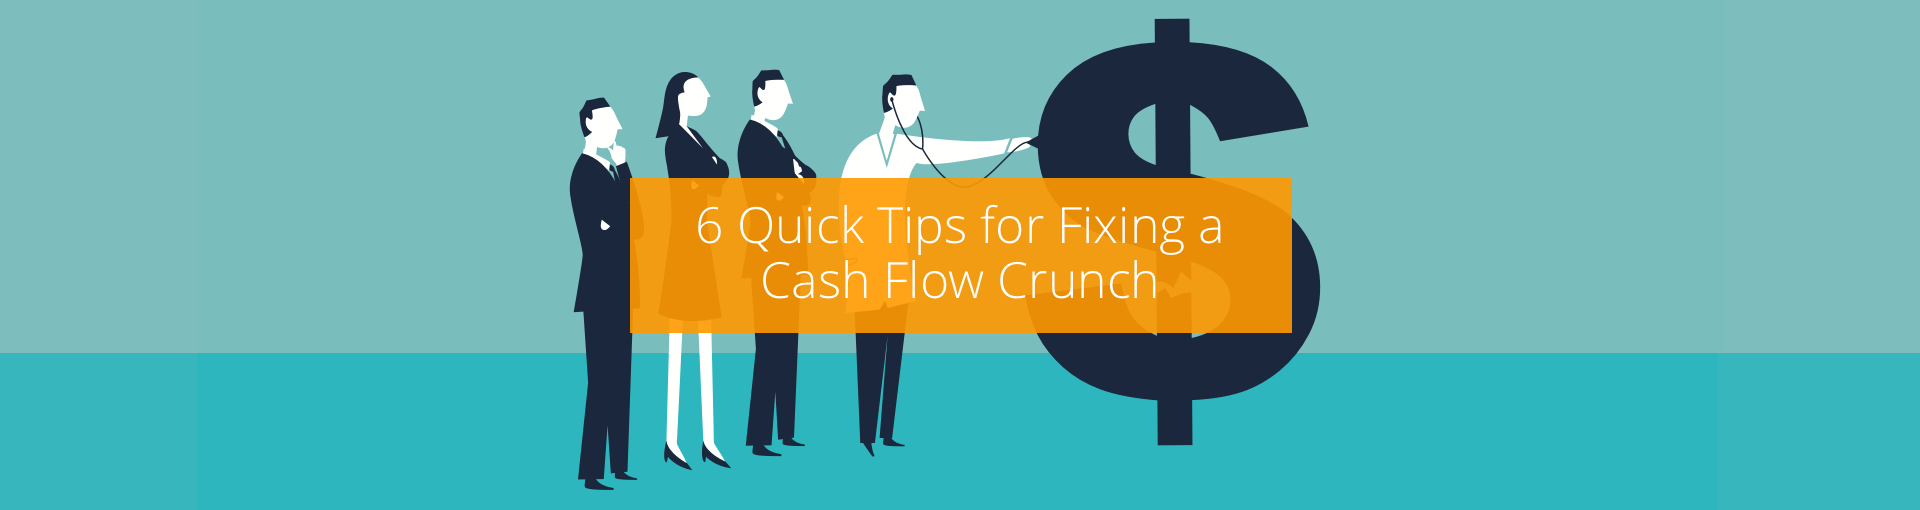 6 Quick Tips for Fixing a Cash Flow Crunch Featured Image